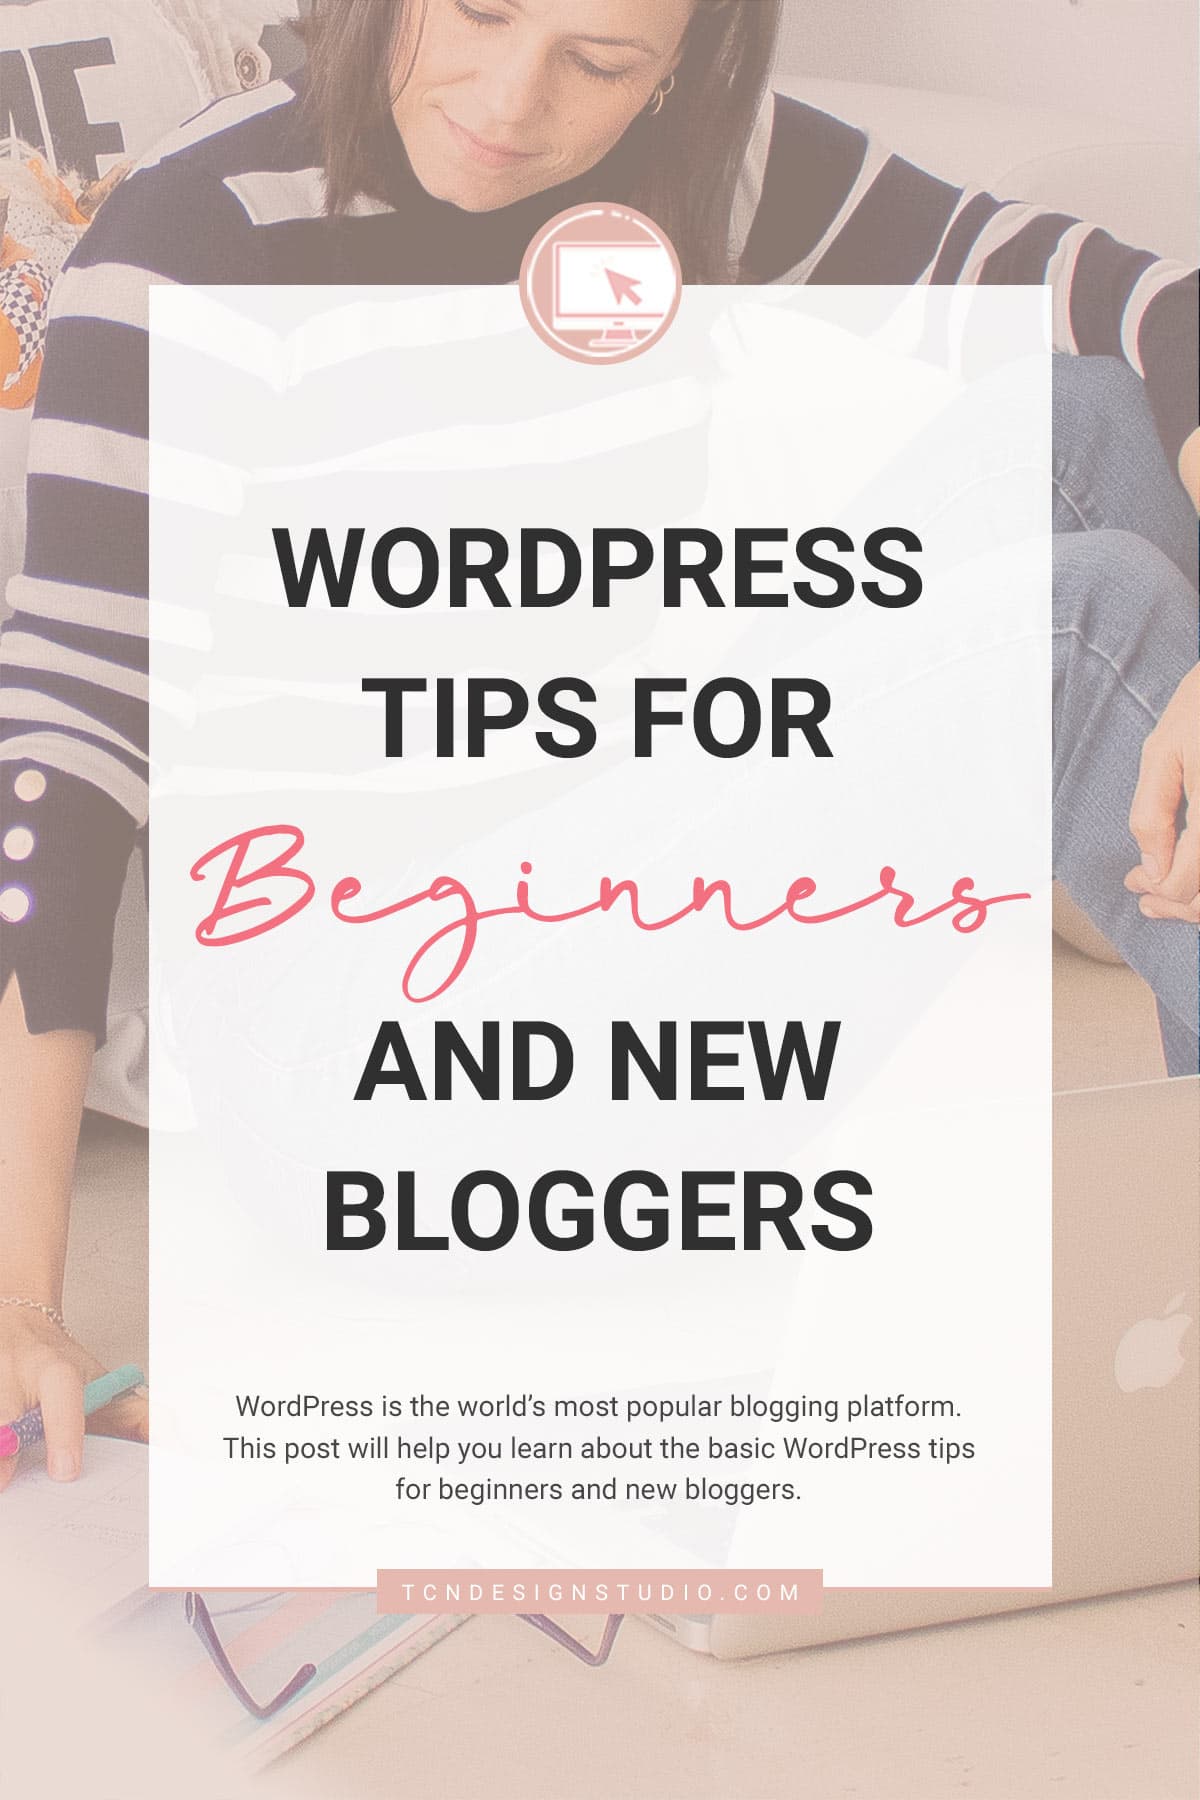 WordPress tips for beginners and new bloggers Cover Image photo background pink overlay with Title text overlay